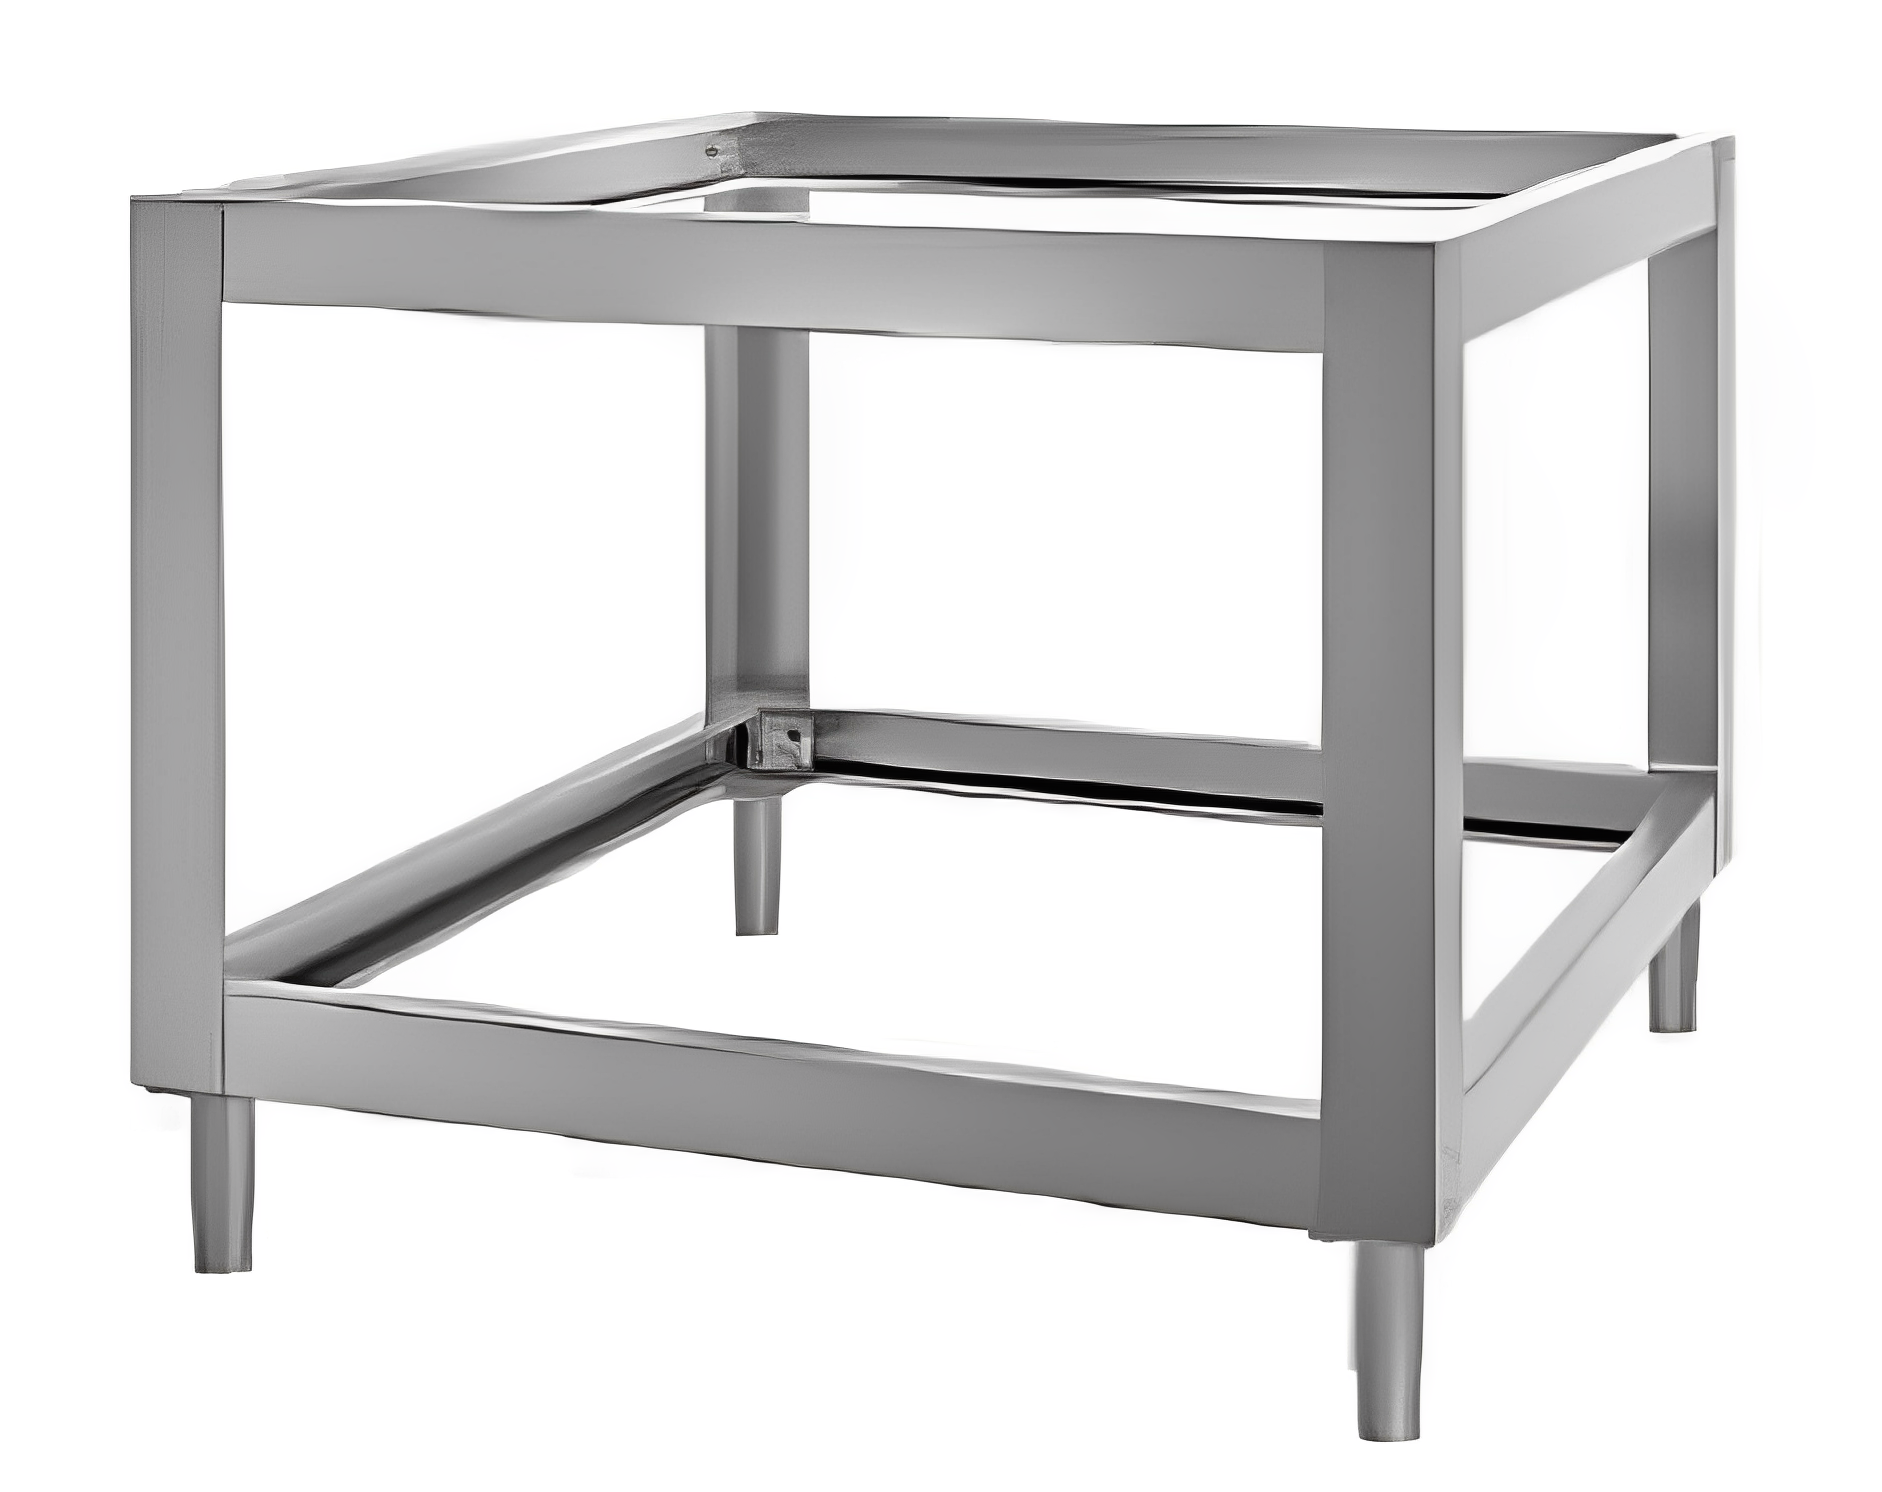 PIZZAGROUP Entry Max S12 Stands in stainless steel